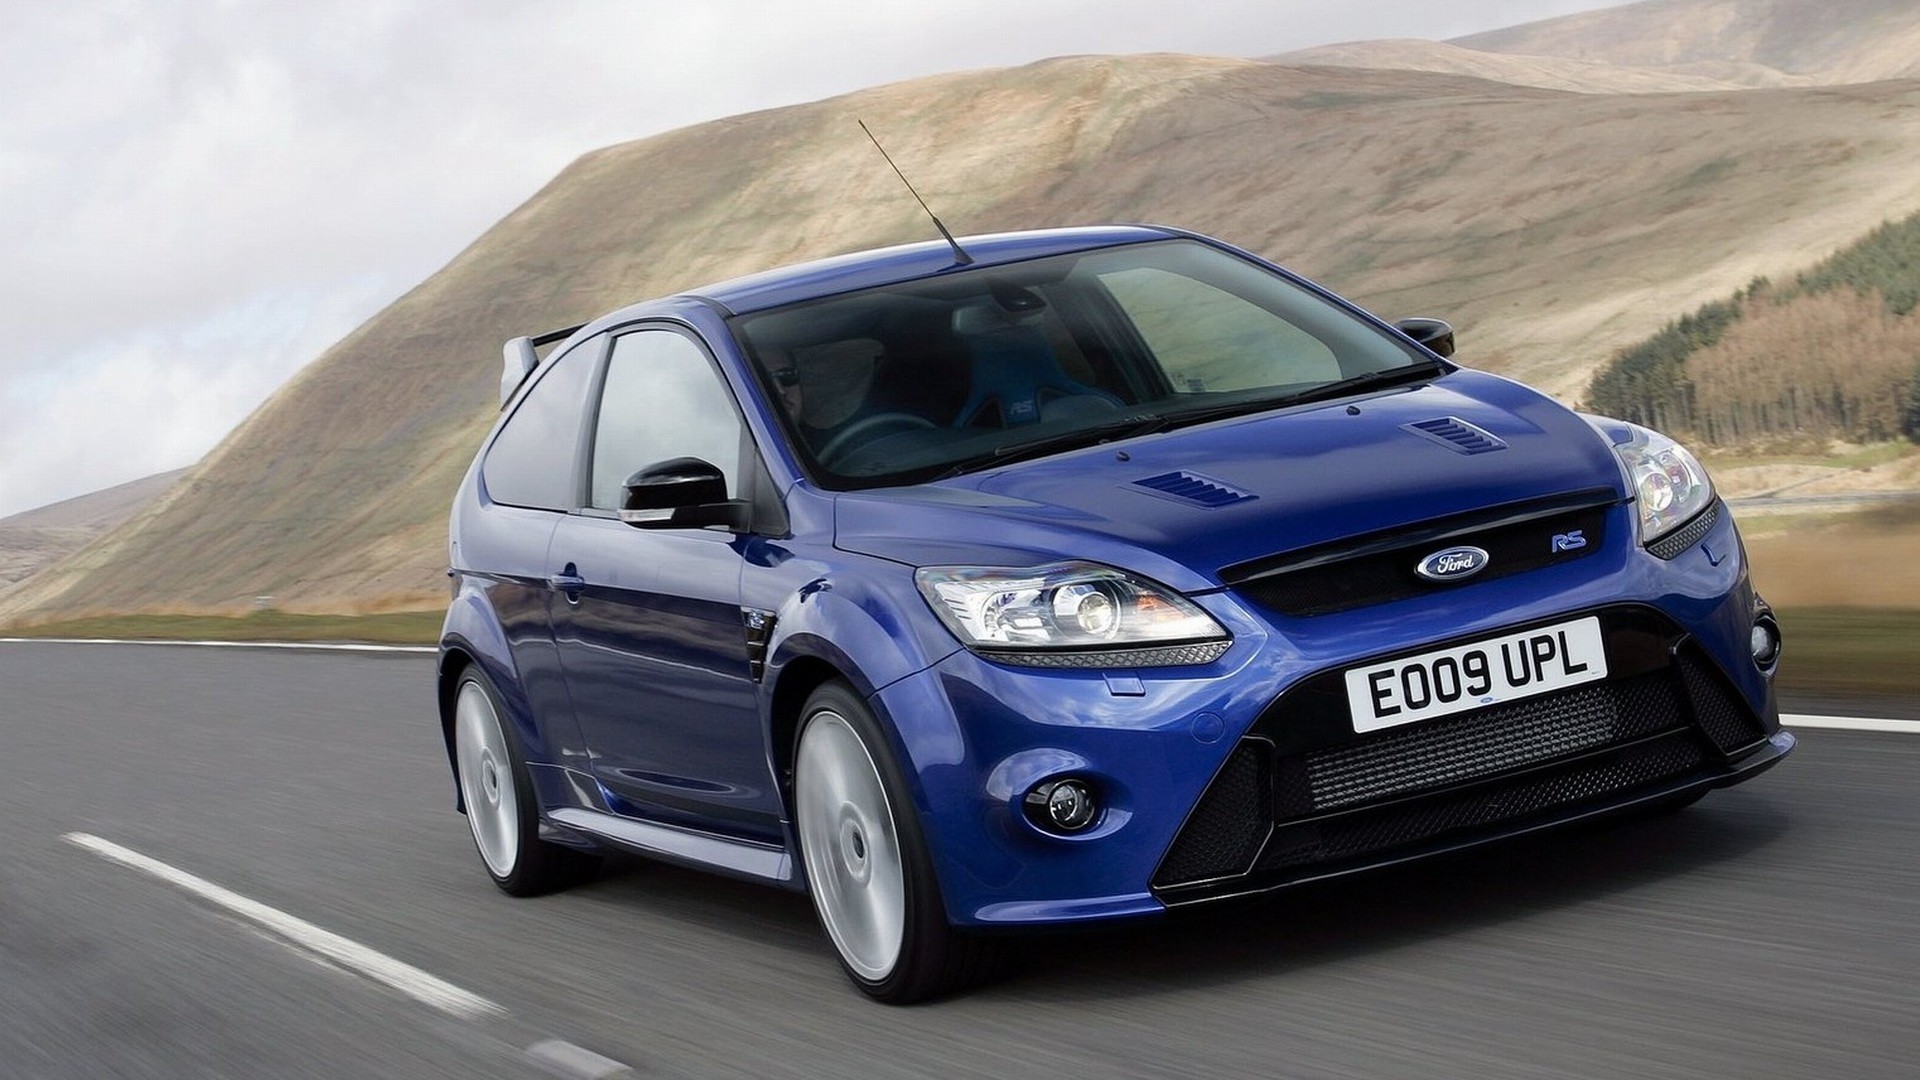 Ford Focus Rs 2009 Wallpaper